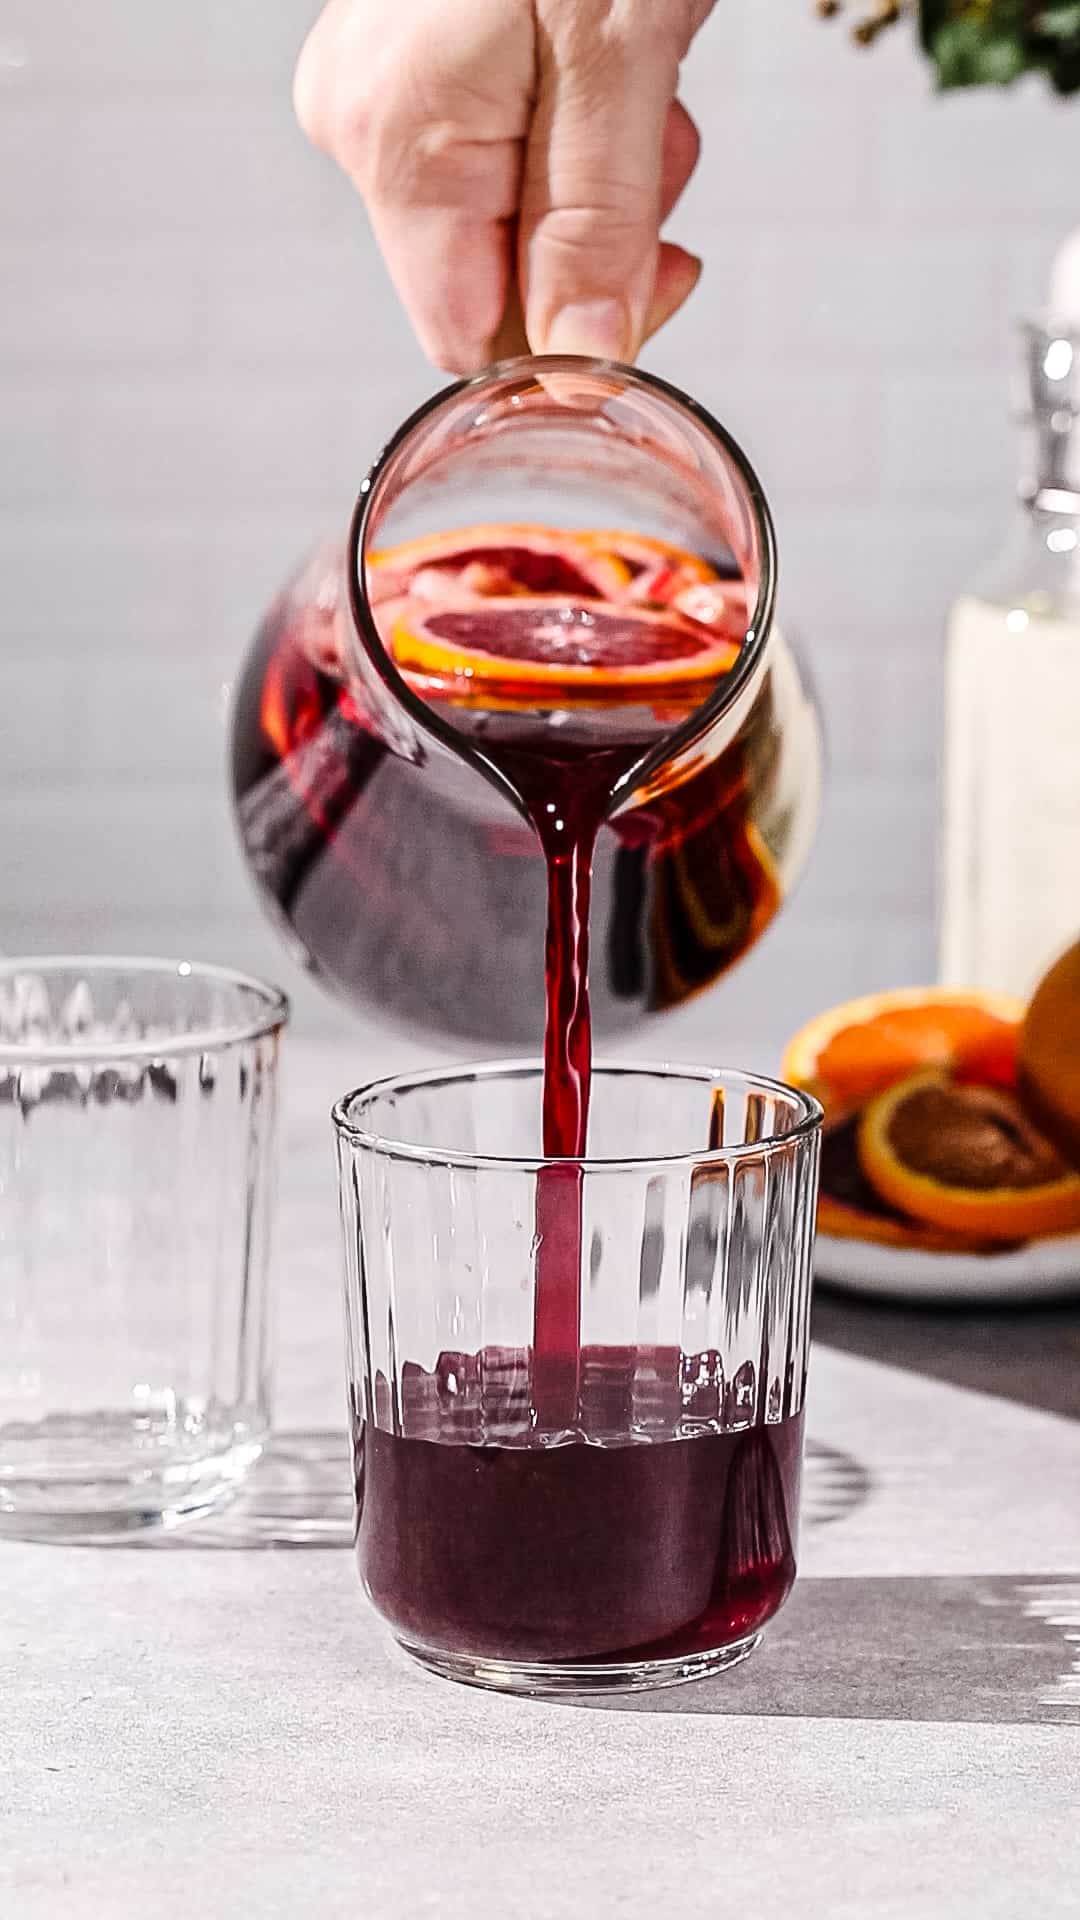 Hand using a glass pitcher to pour non-alcoholic sangria into a lowball glass.